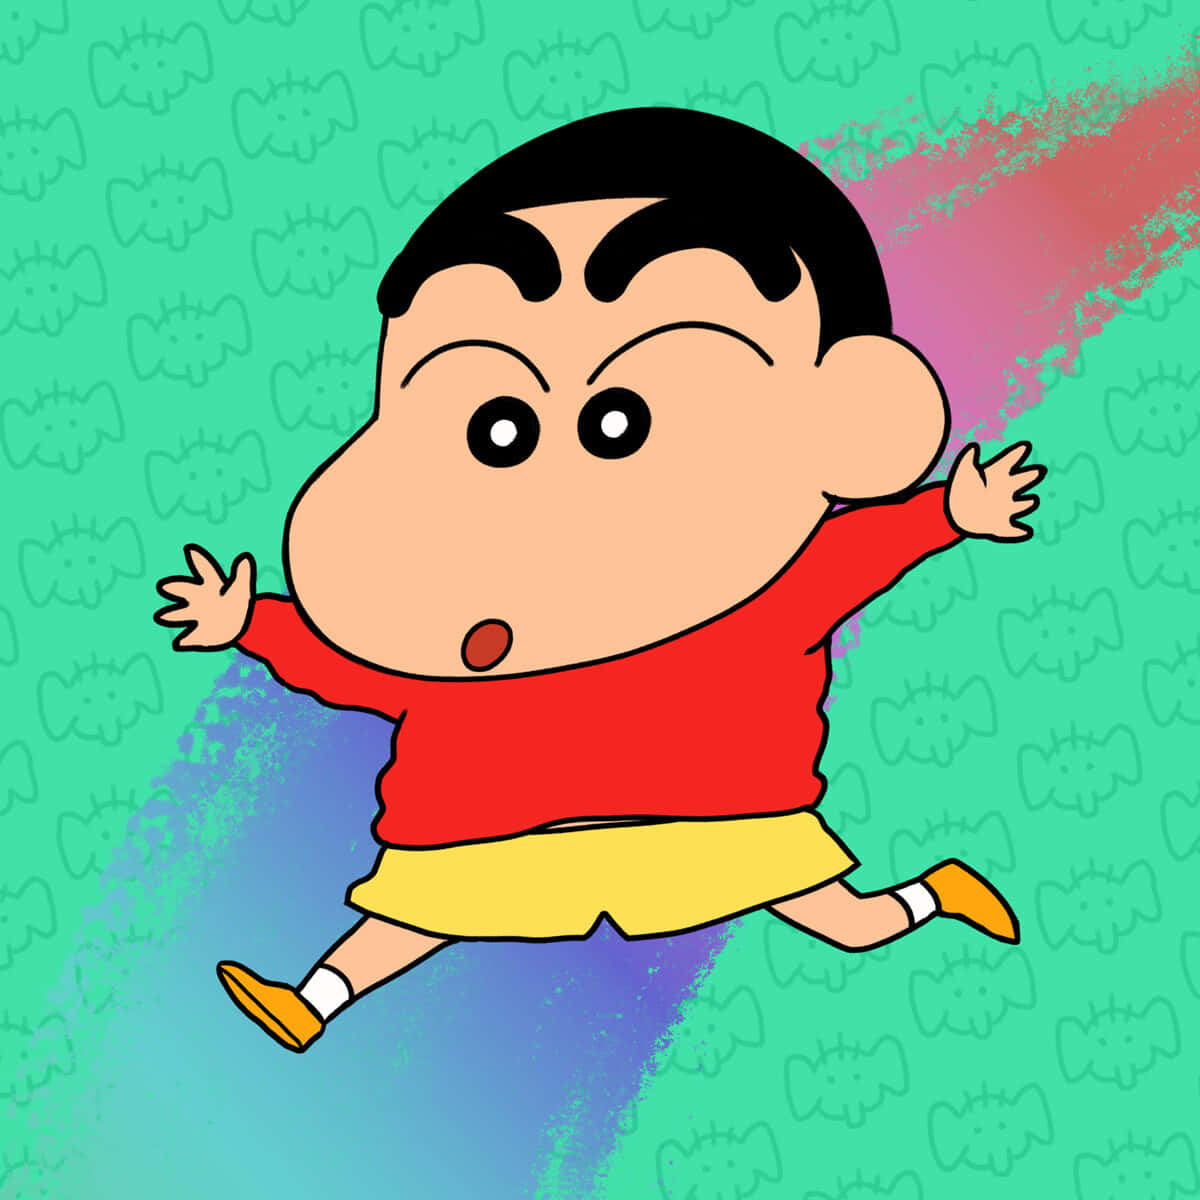 "Crayon Shin-Chan is here for trouble and for laughs!"